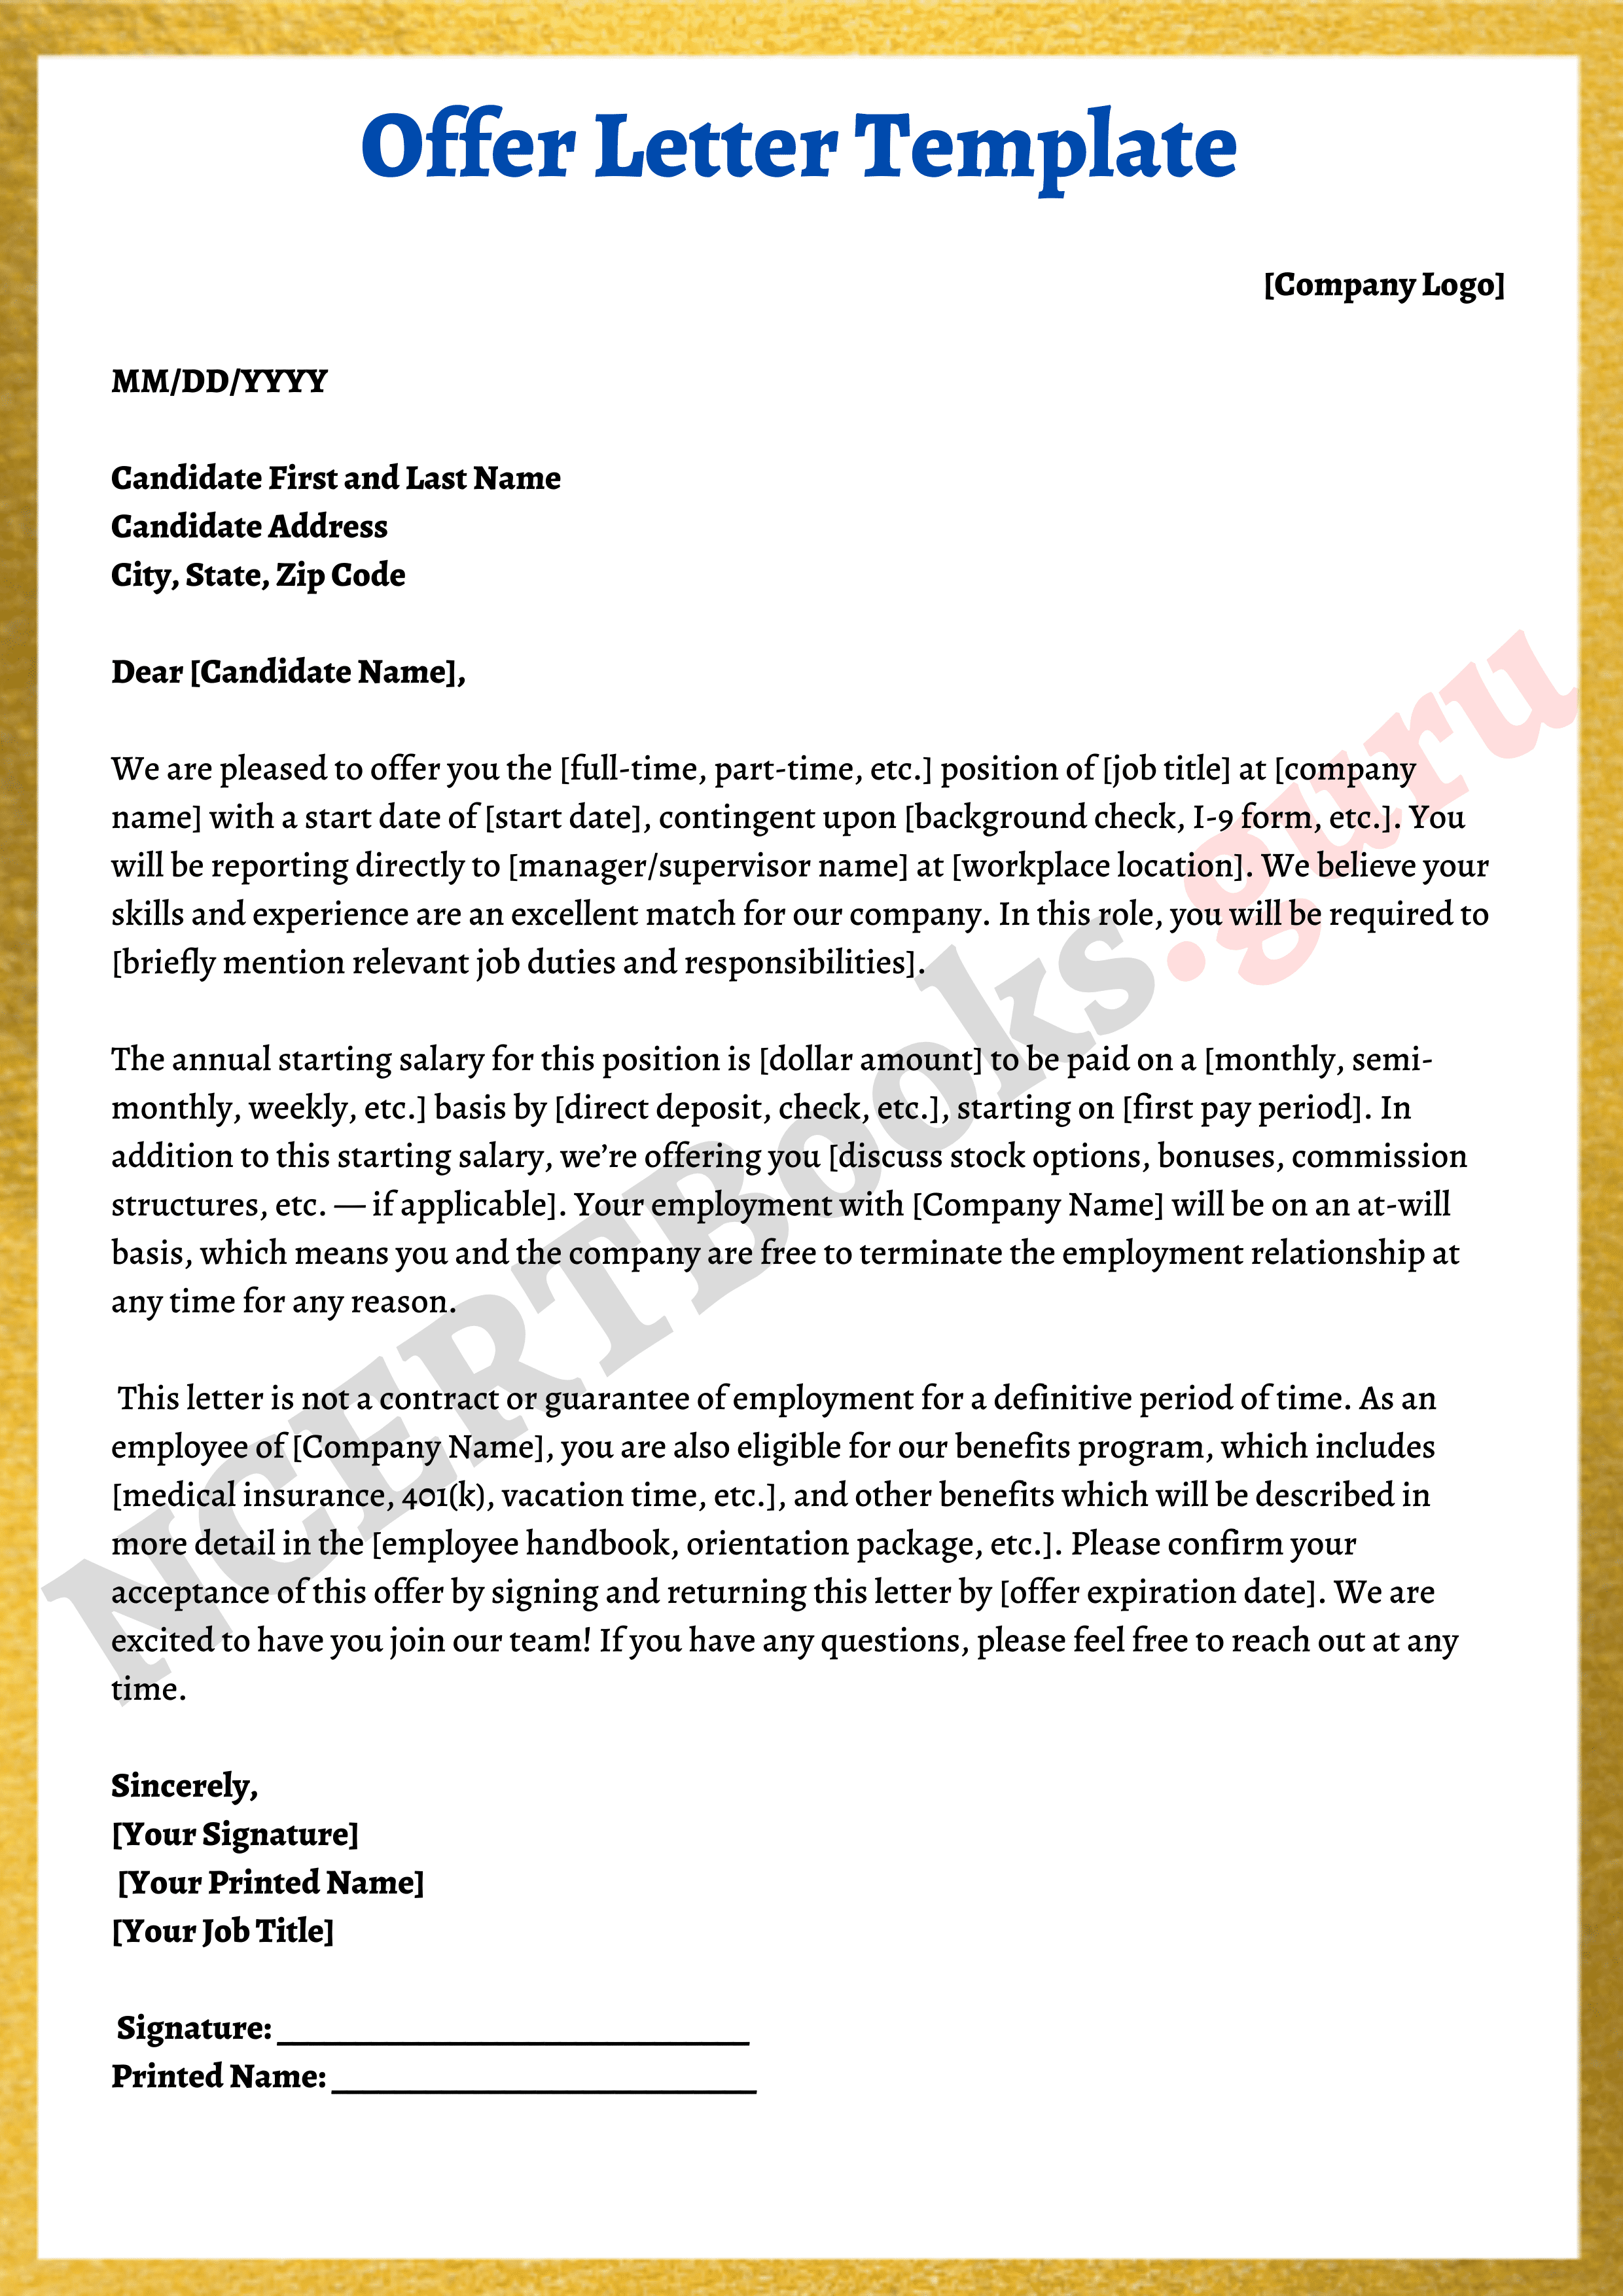 Free Offer Letter Format, Samples Tips on How to Write an Offer Letter?